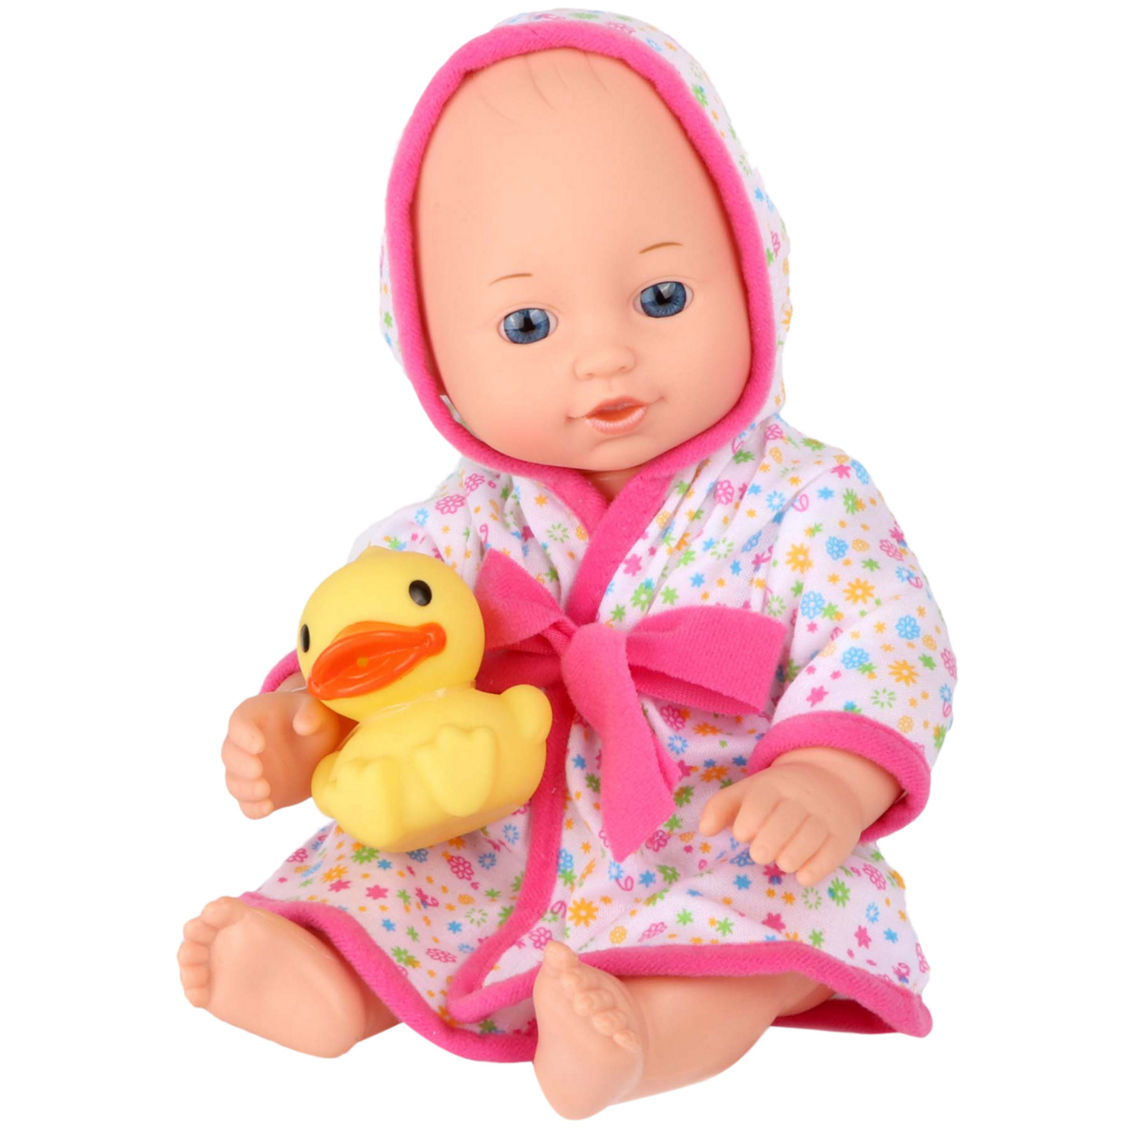 Dream Collection 12 in. Baby Bath Time Play Set - Image 3 of 5